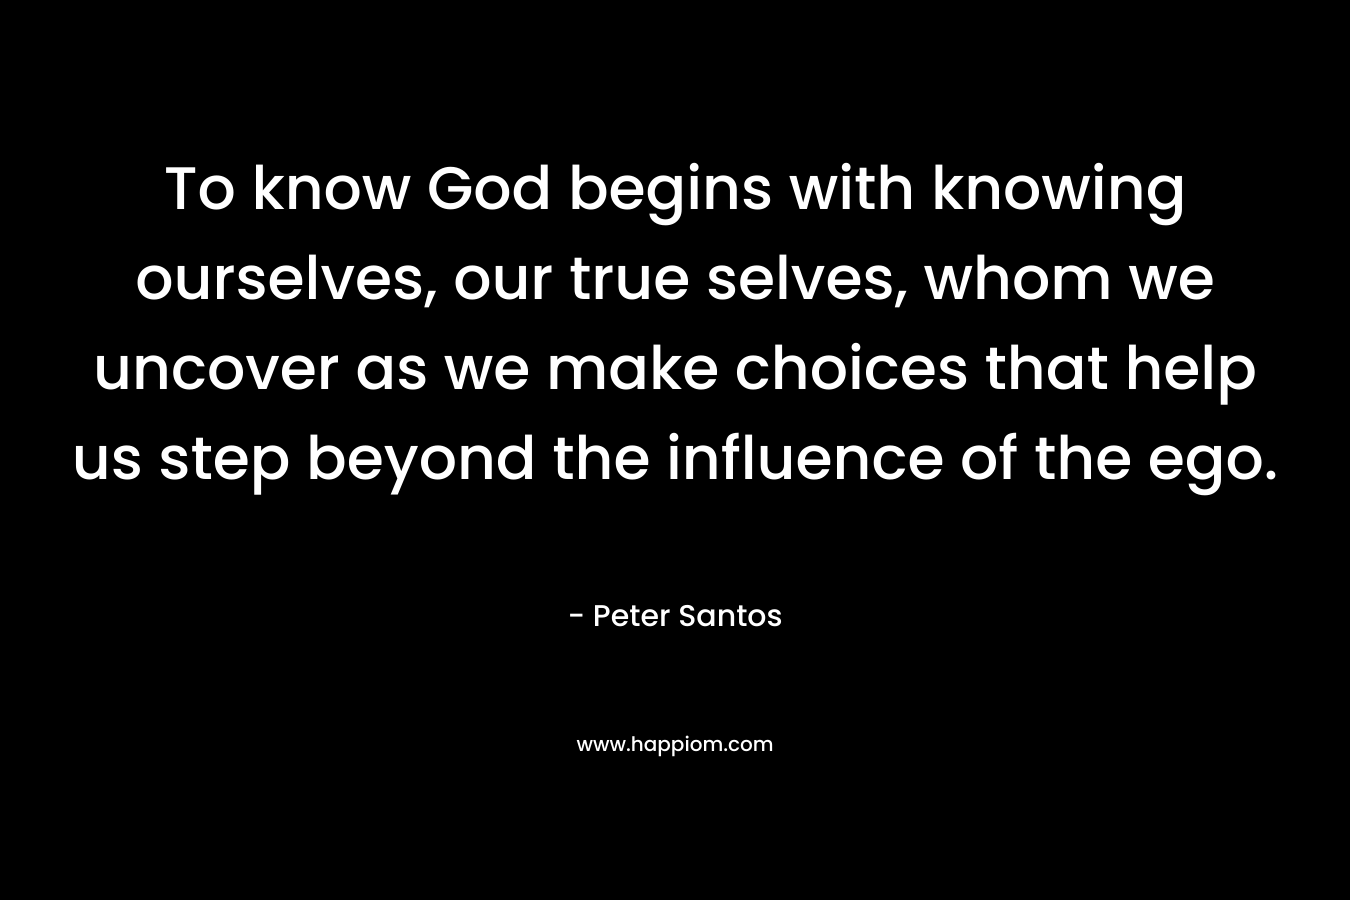 To know God begins with knowing ourselves, our true selves, whom we uncover as we make choices that help us step beyond the influence of the ego. – Peter Santos